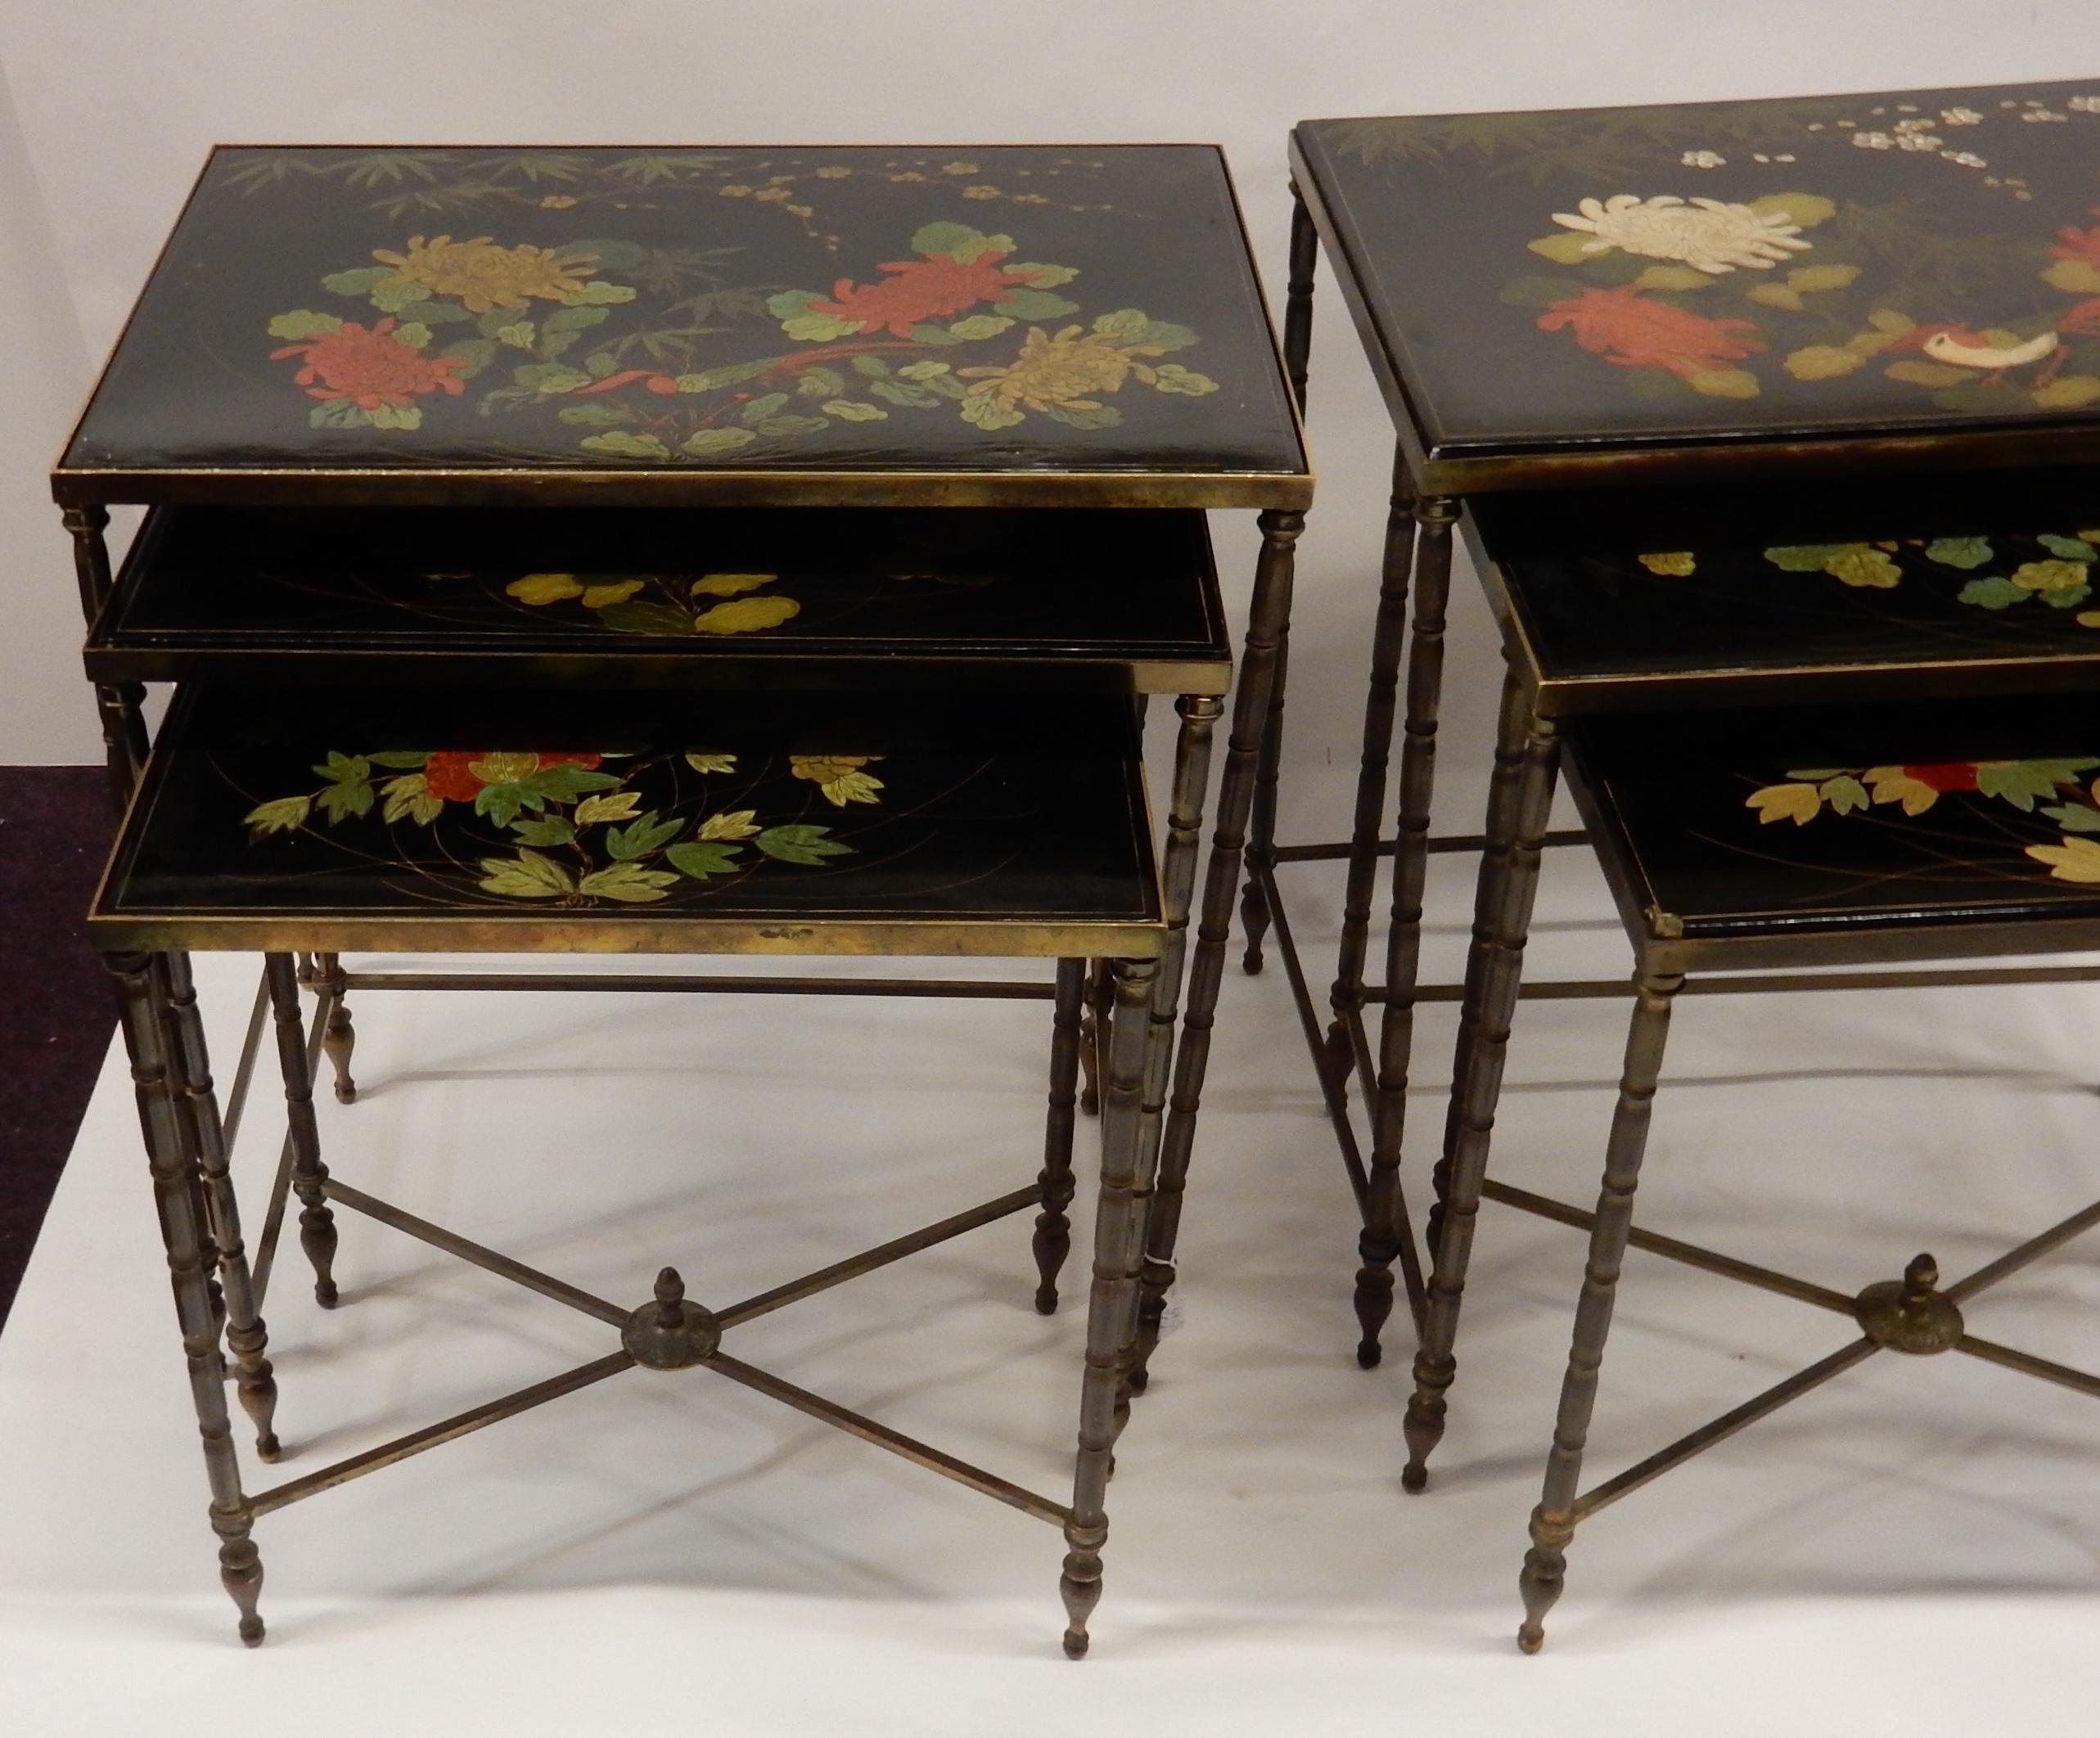 Serie of 3 nesting tables gilded brass deco bamboo with top lacquered black and gold
Measures: 50 x 35 x H 53 cm
45 x 30 x H 48 cm
40 x 25 x H 44 cm
circa 1950-1970
Good condition.